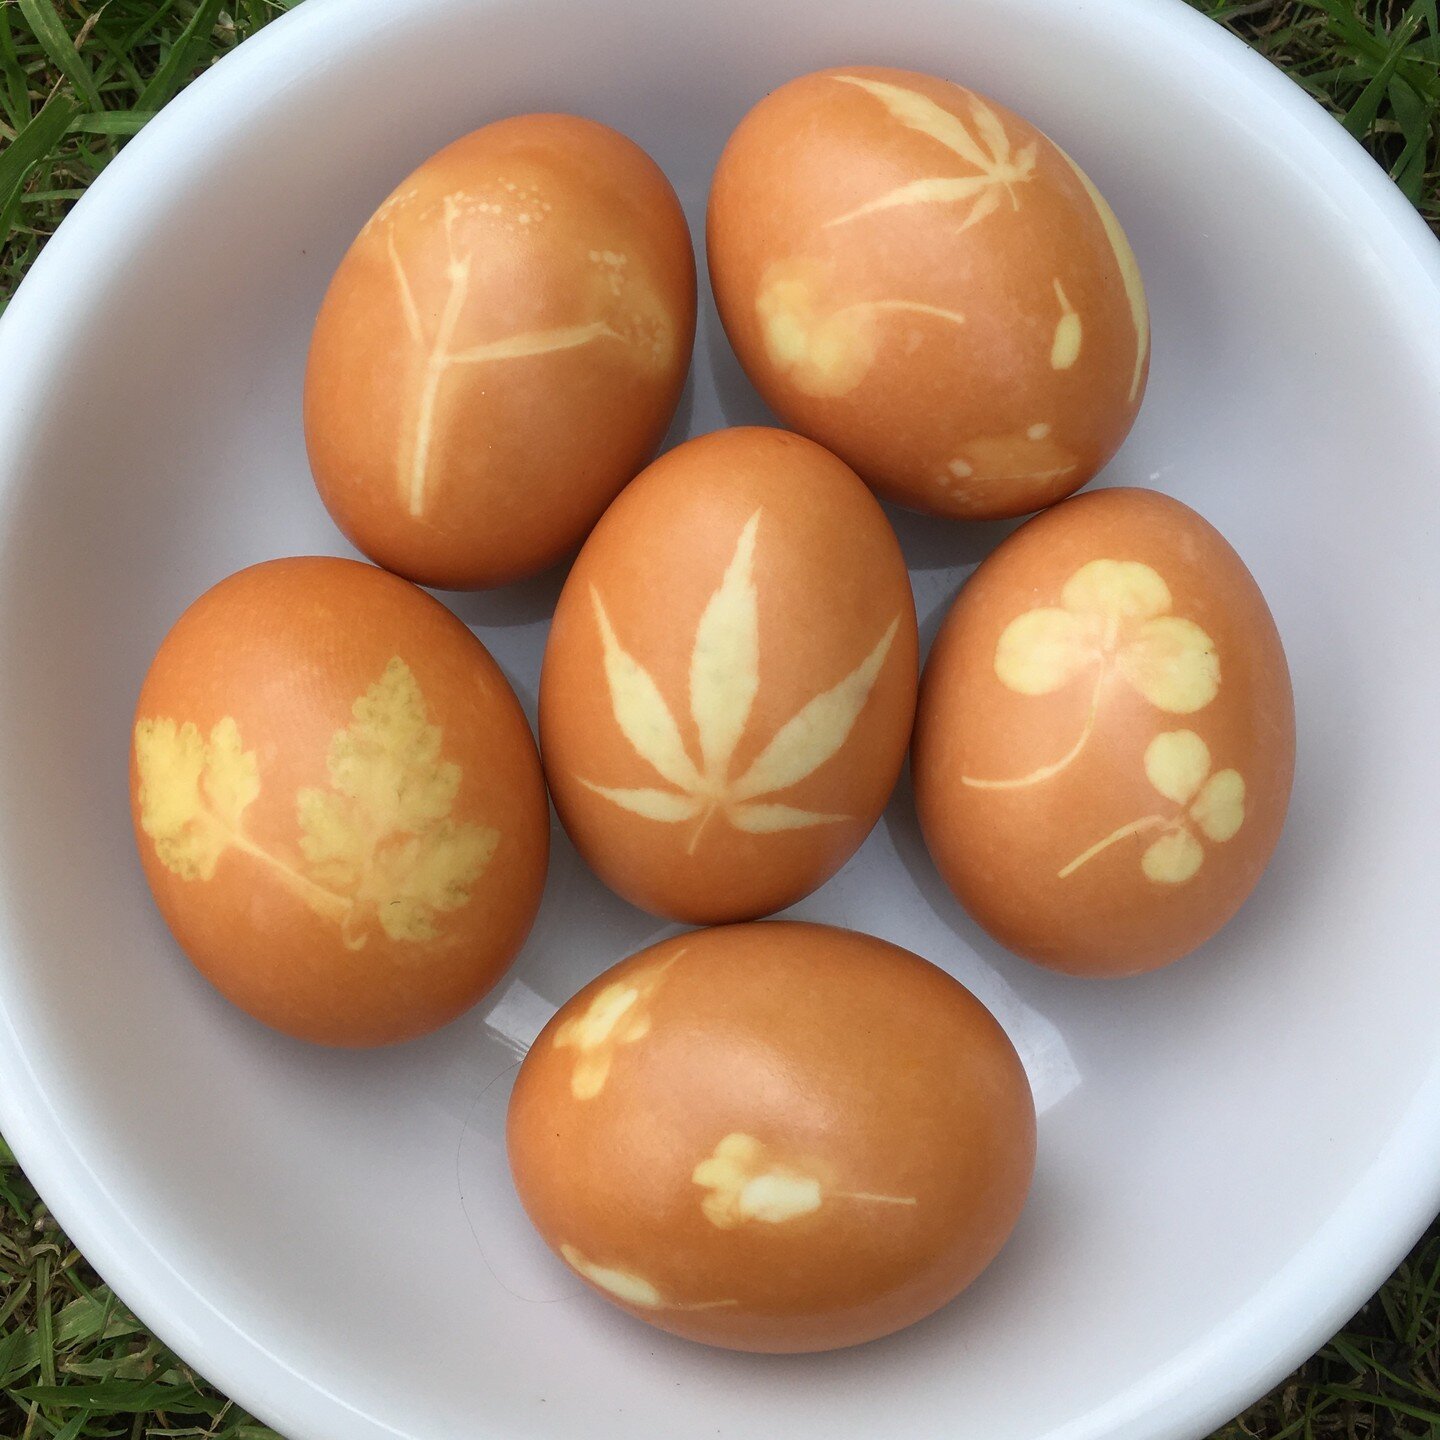 I had a lovely time making these batik eggs with my nearly 2 year old today, using leaves from the garden. There is something so therapeutic for me about simple crafts, especially when they bring such lovely results.

Thank you Mud + Bloom for the in